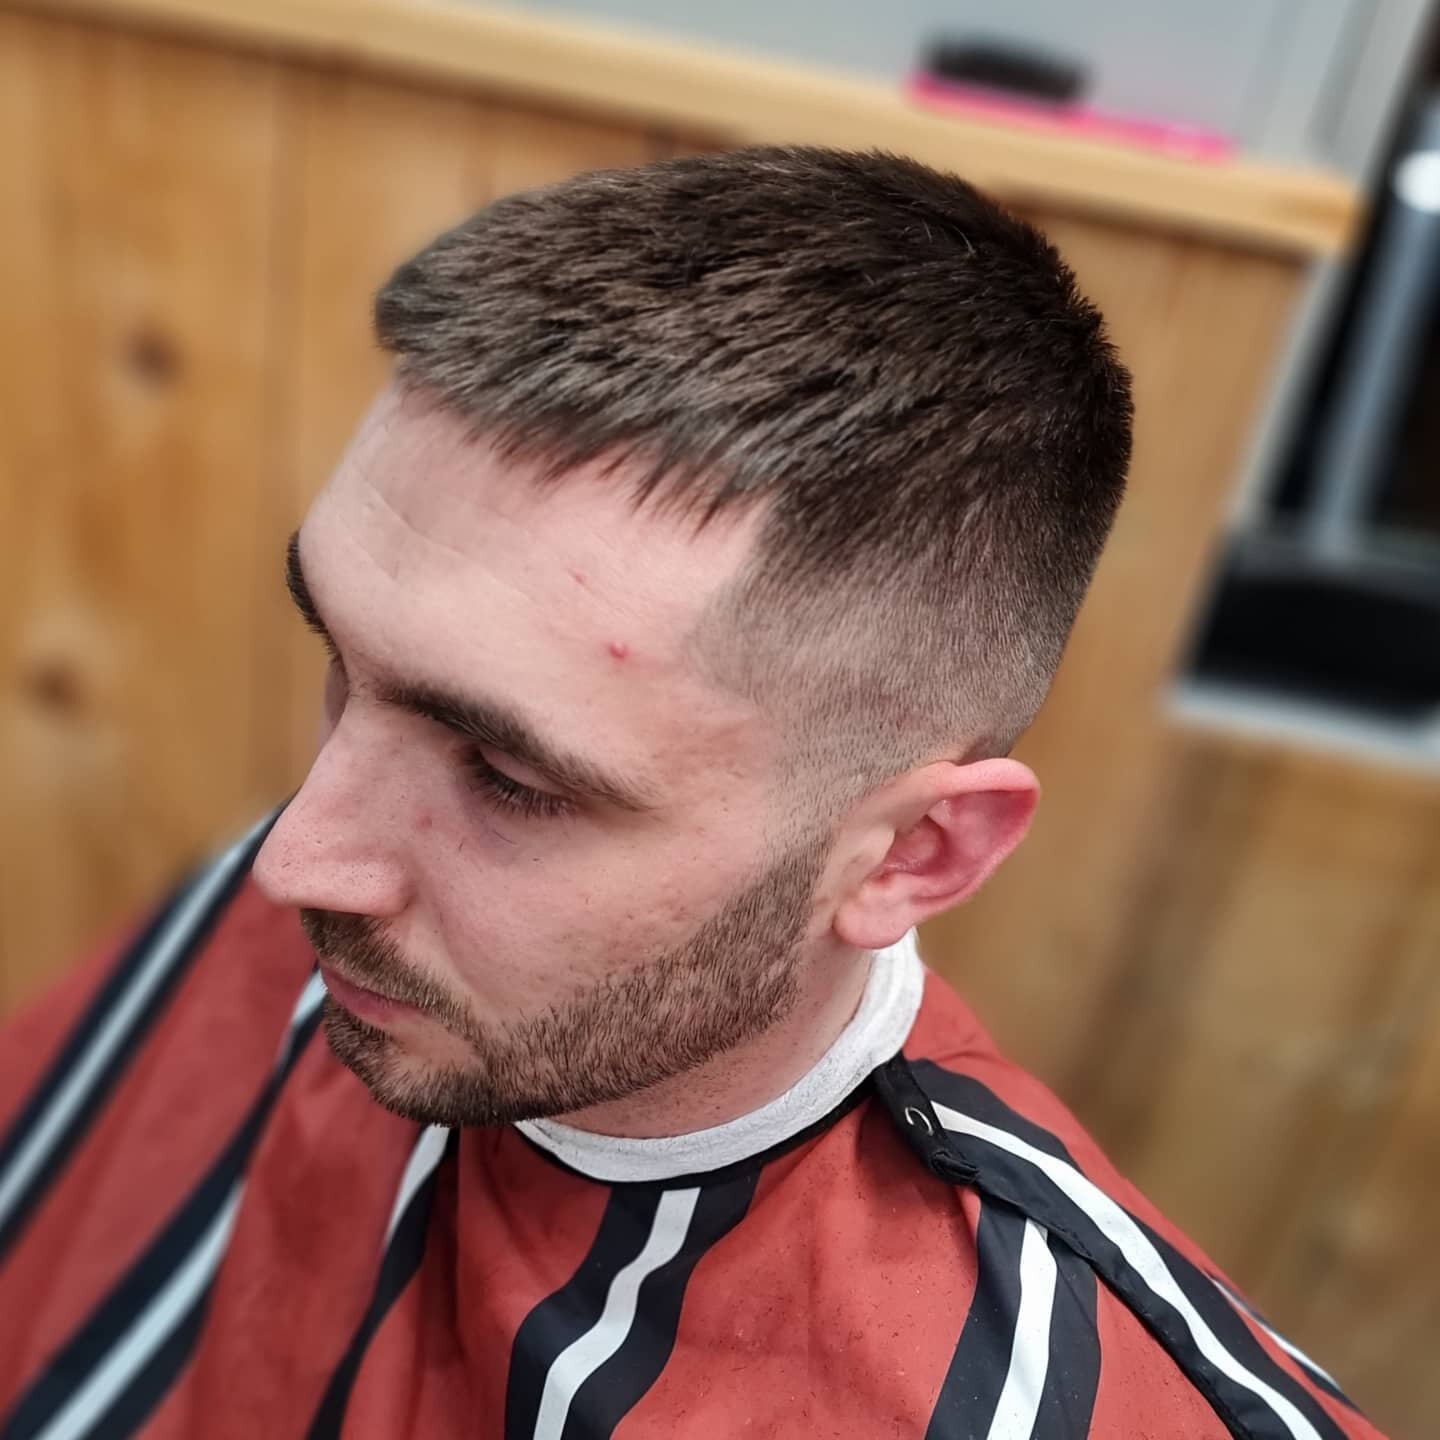 C R O P P E D

Tidy up for @luketill98 

Availability this week, walk ins welcome. Appointments guaranteed. 

#barberlife #barbergang #Kent #ukbarbers #skinfade #crop #hernebay